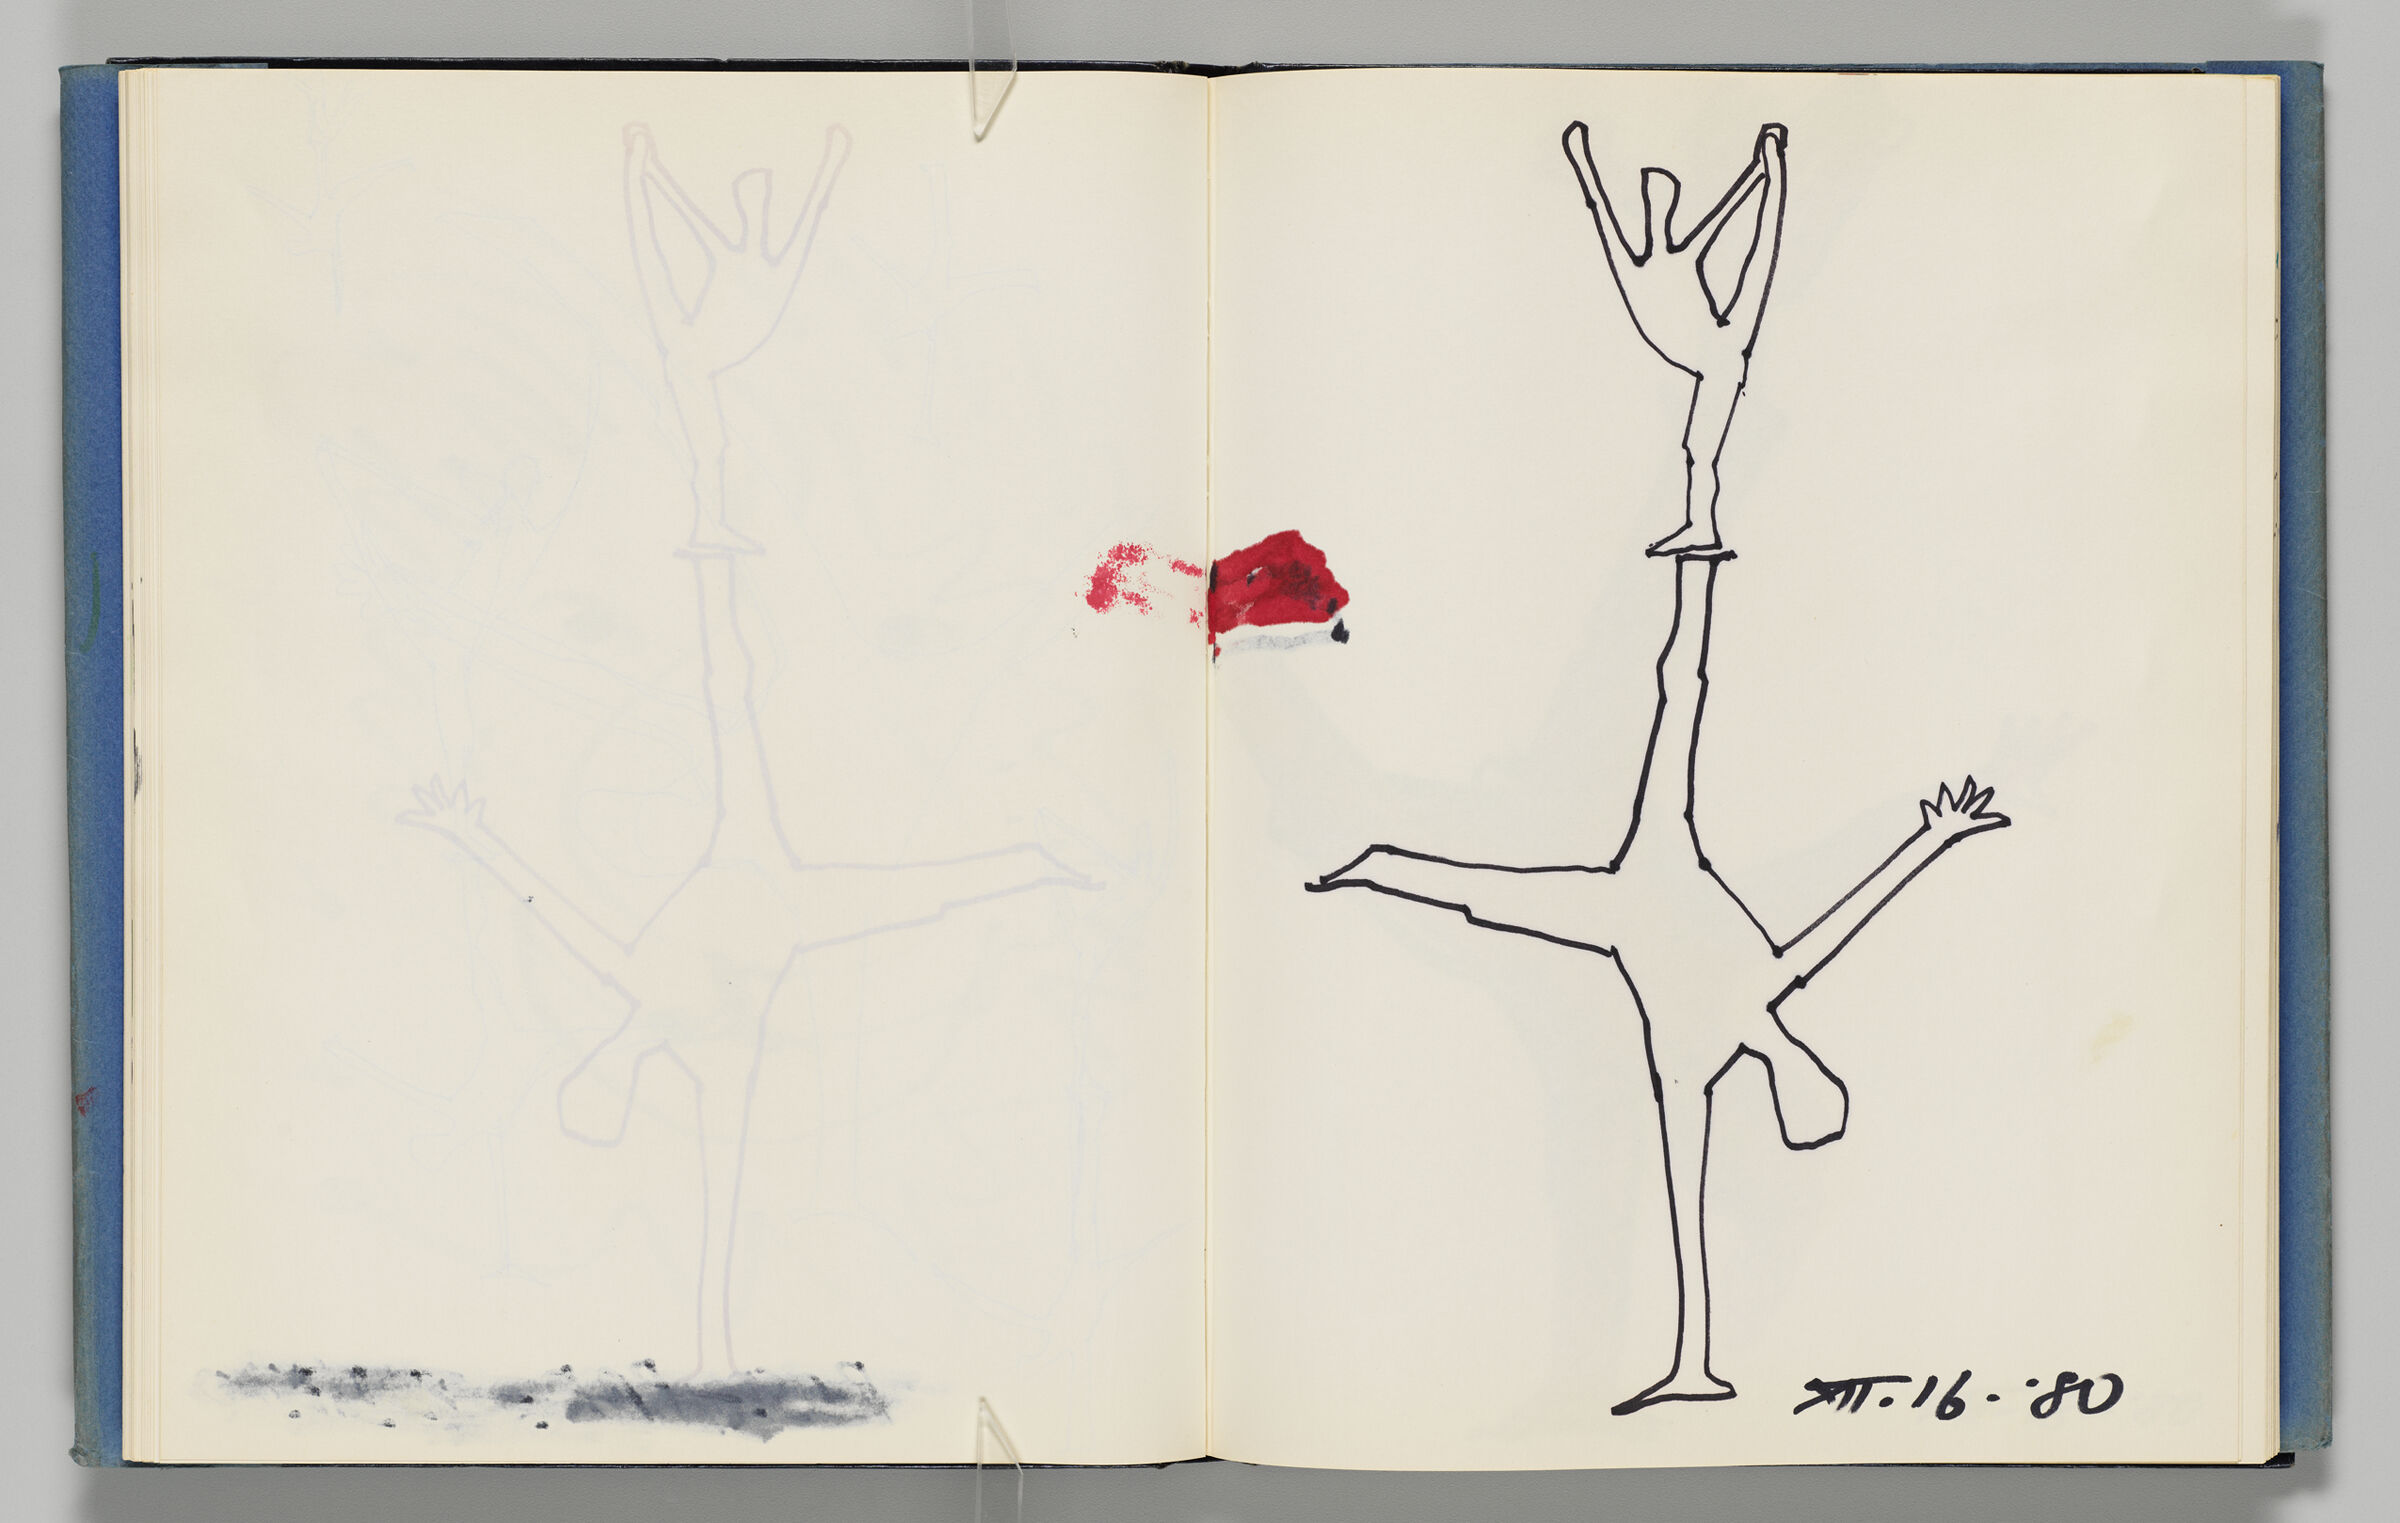 Untitled (Bleed-Through Of Previous Page, Left Page); Untitled (Acrobats With Bleed-Through, Right Page)